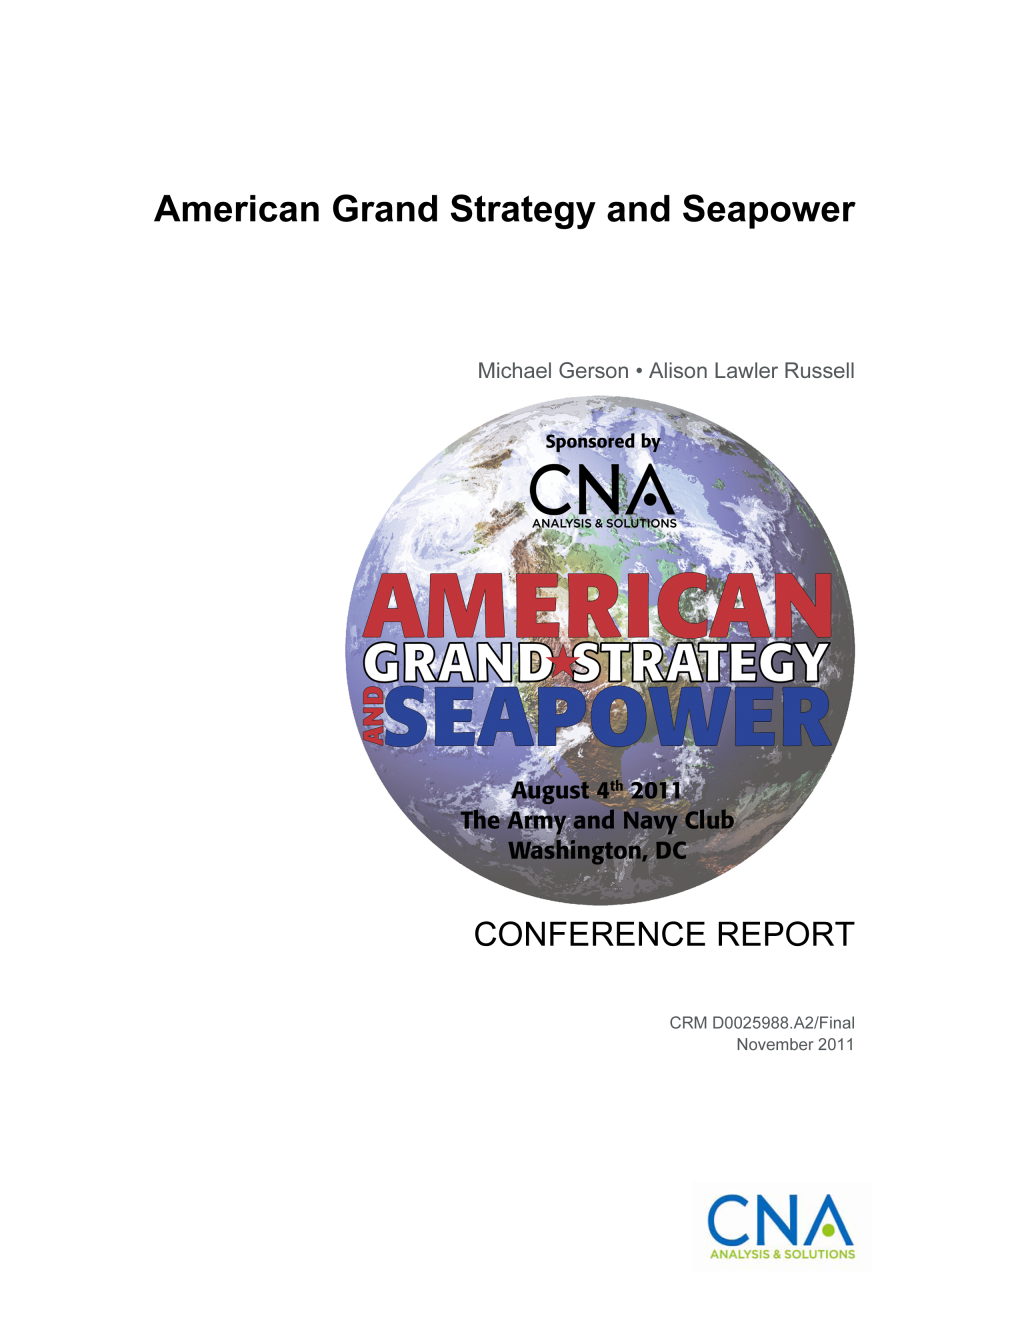 America and Grand Strategy